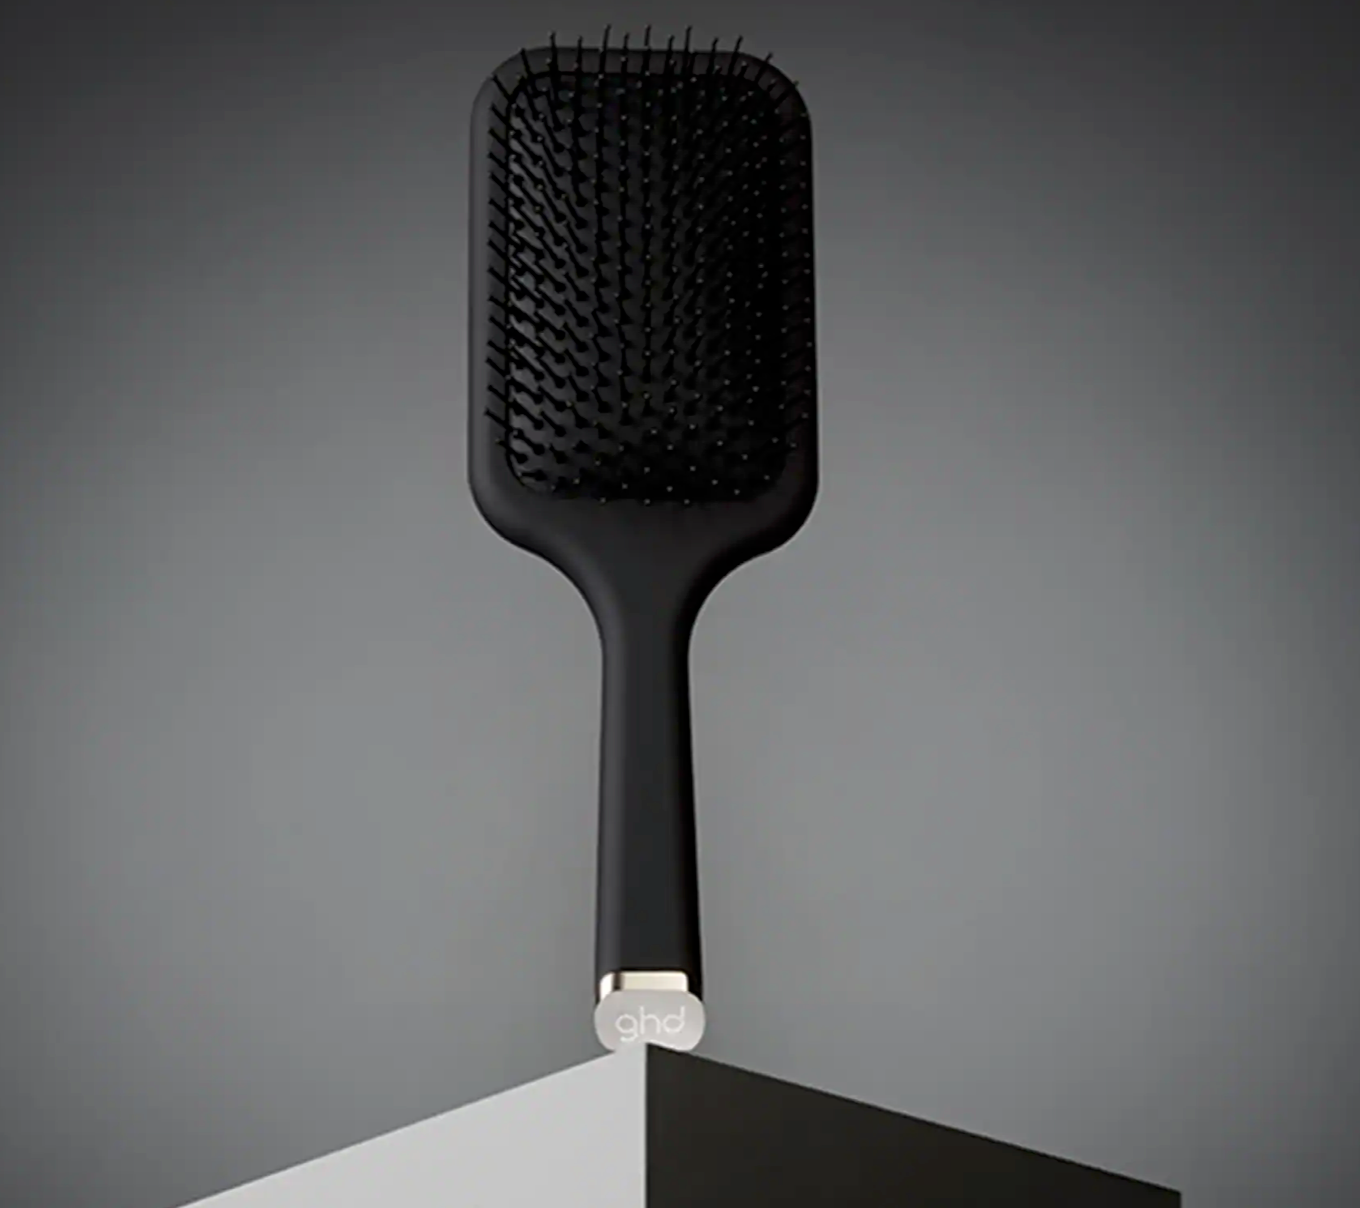 GHD THE ALL ROUNDER - PADDLE BRUSH